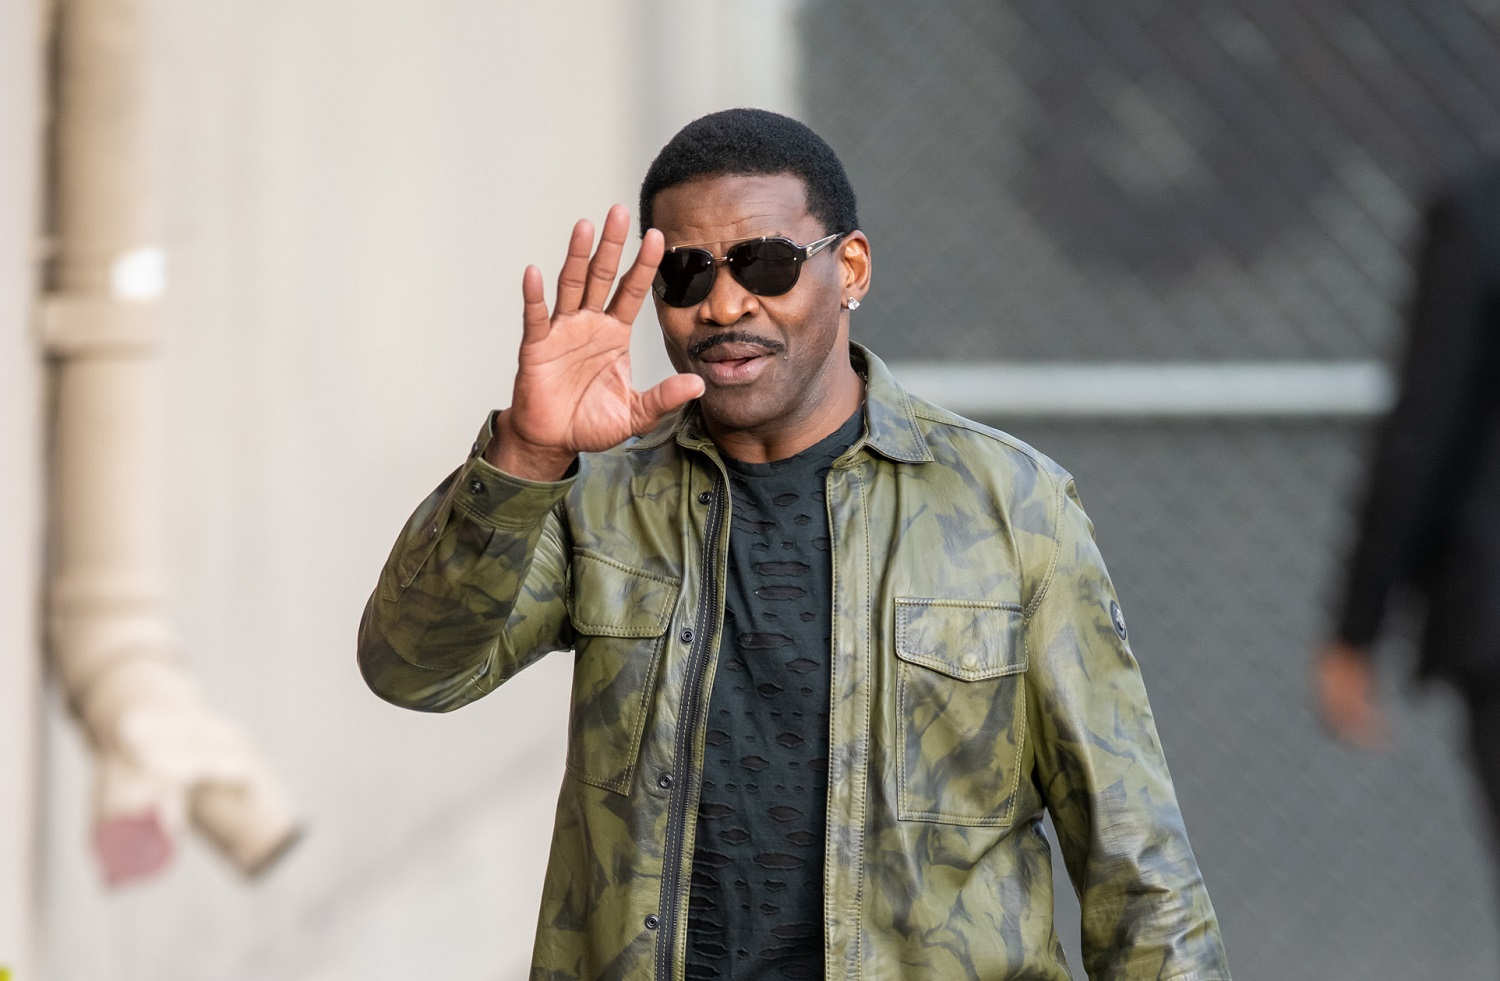 Michael Irvin is seen at 'Jimmy Kimmel Live' on Jan. 21, 2020, in Los Angeles.